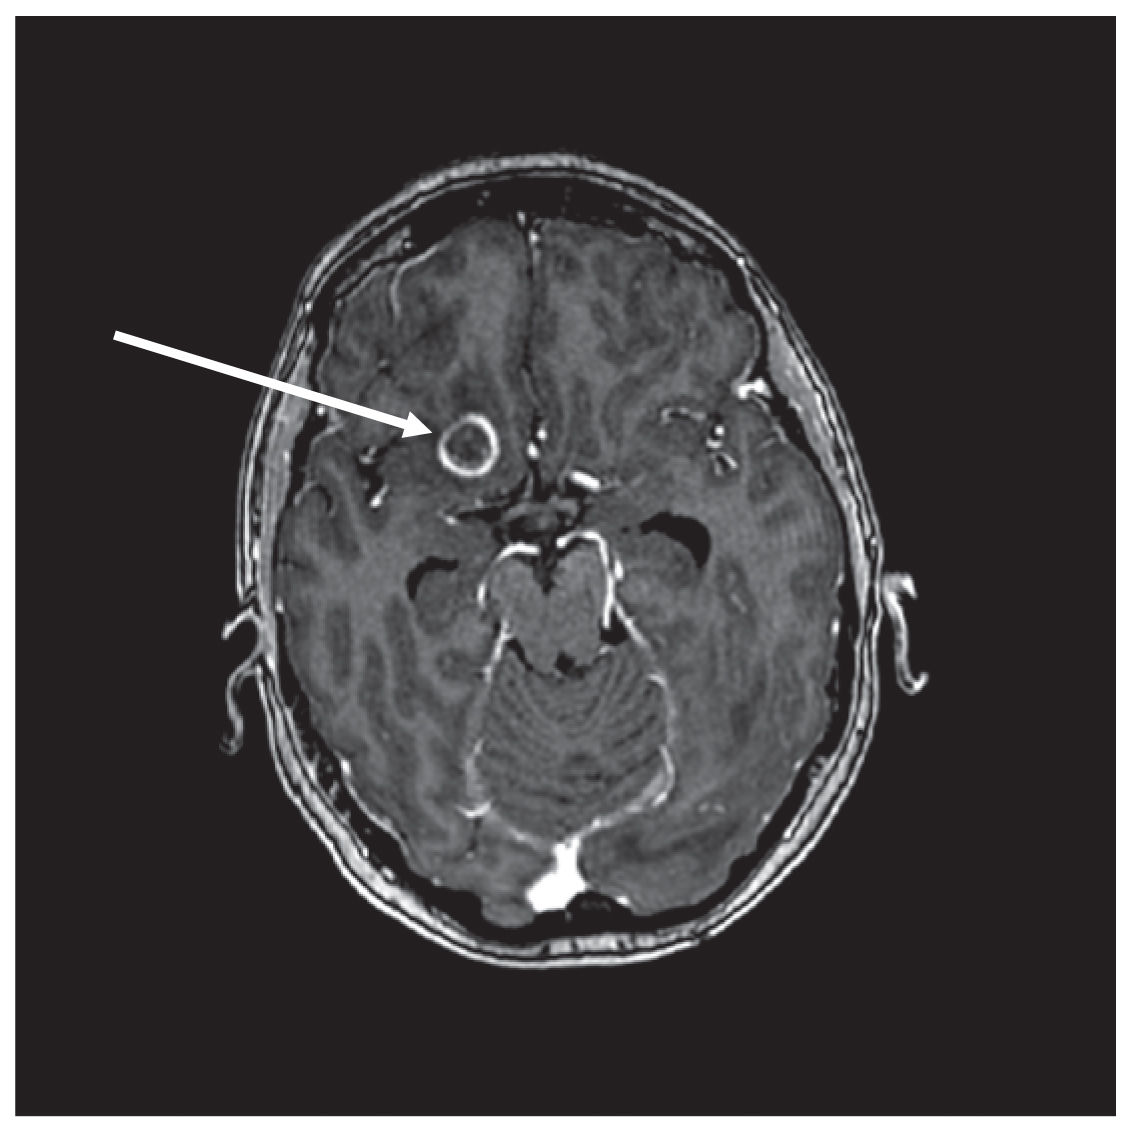 Cerebral abscesses imaging: A practical approach